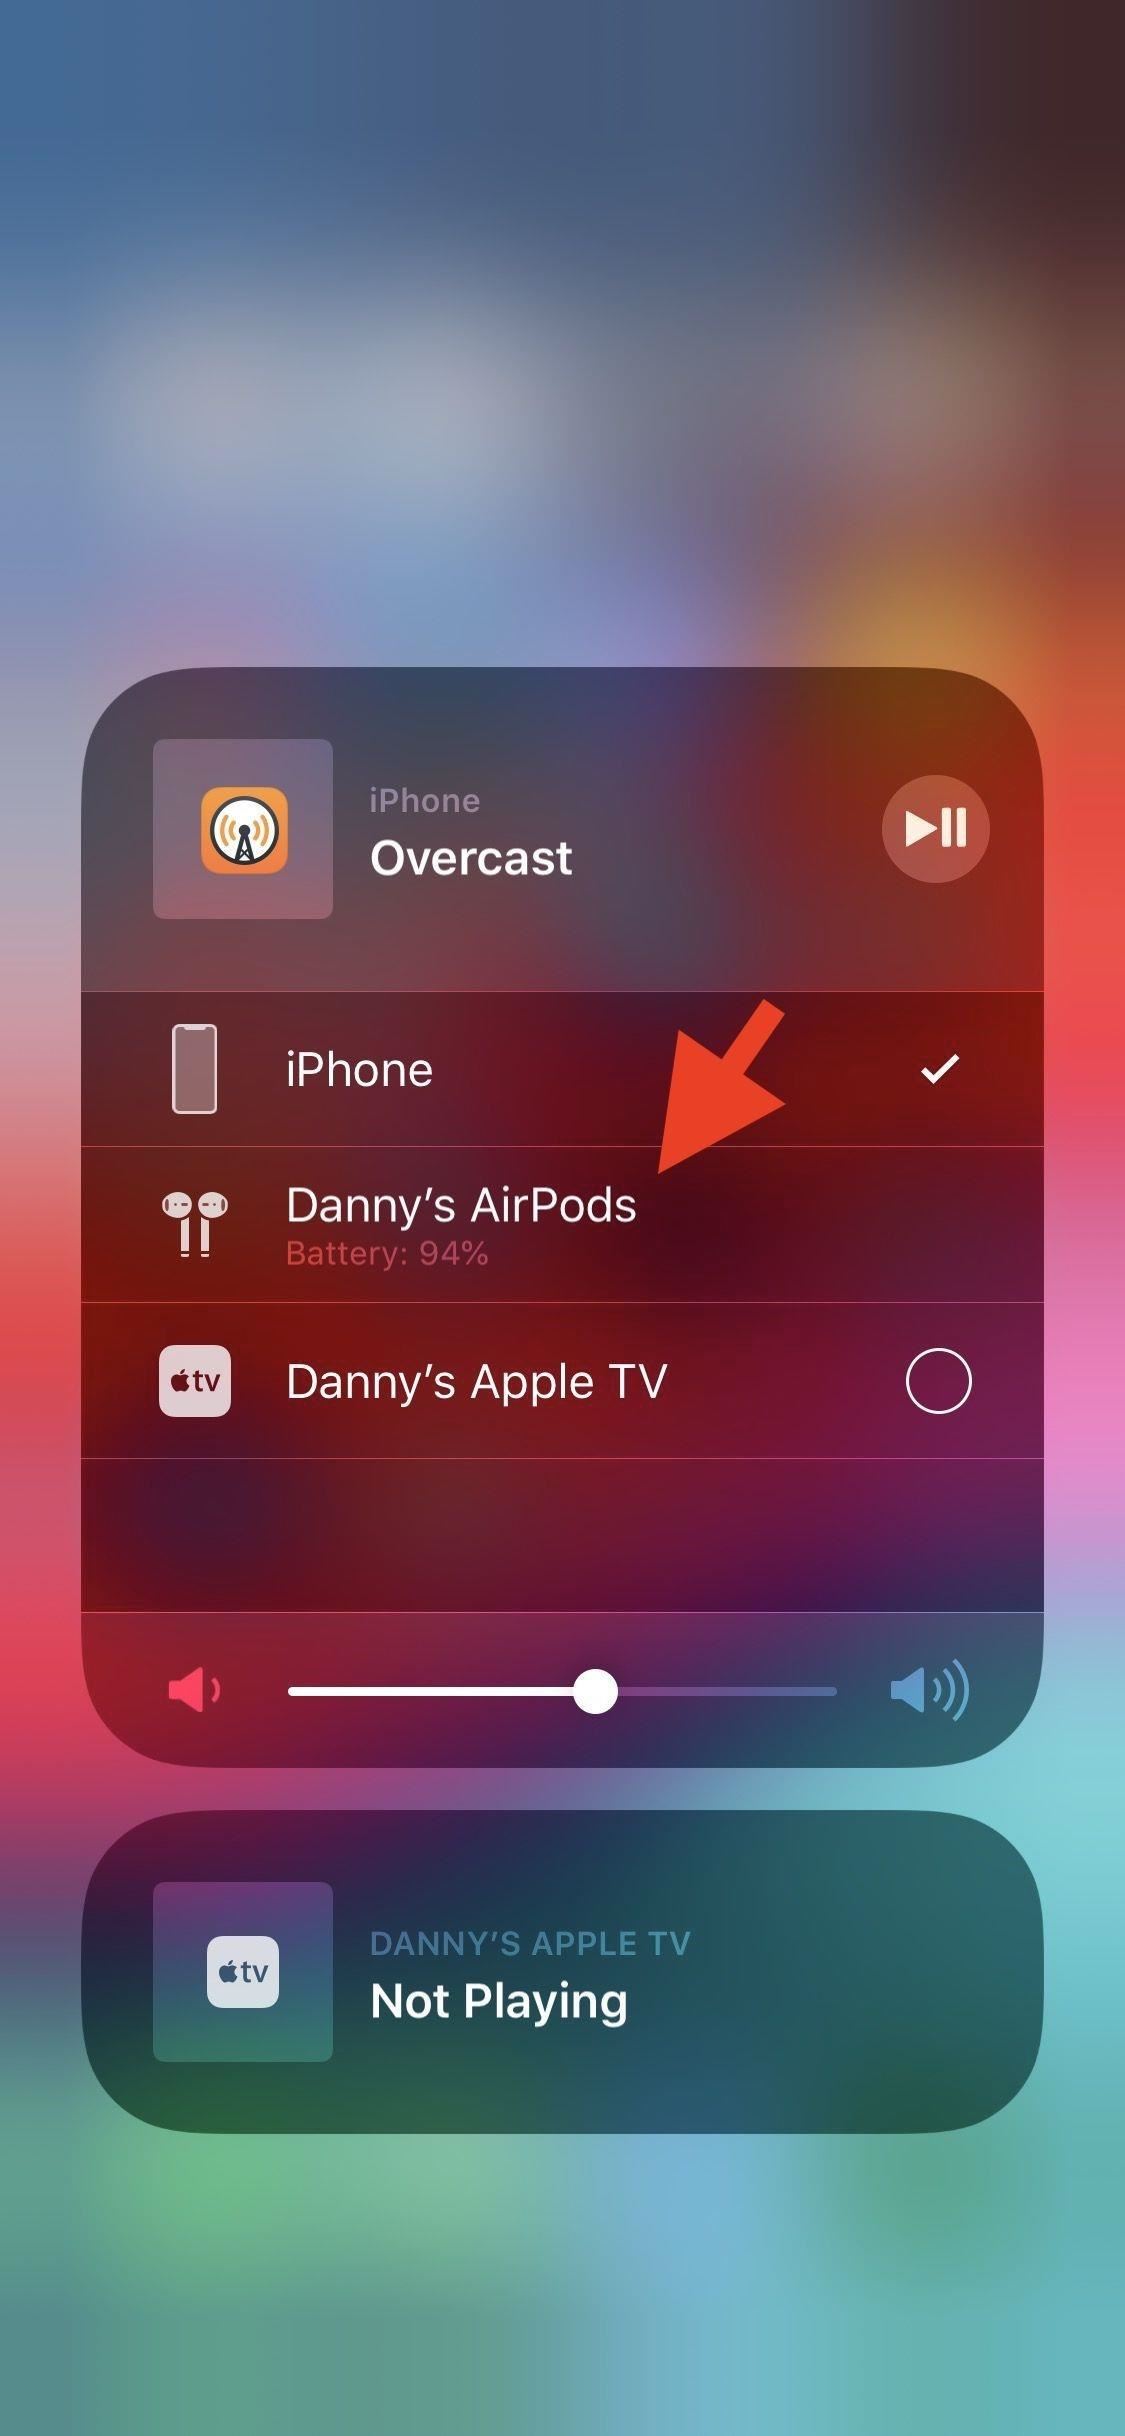 How to Reconnect Your AirPods to Your iPhone Without Digging in the Bluetooth Settings